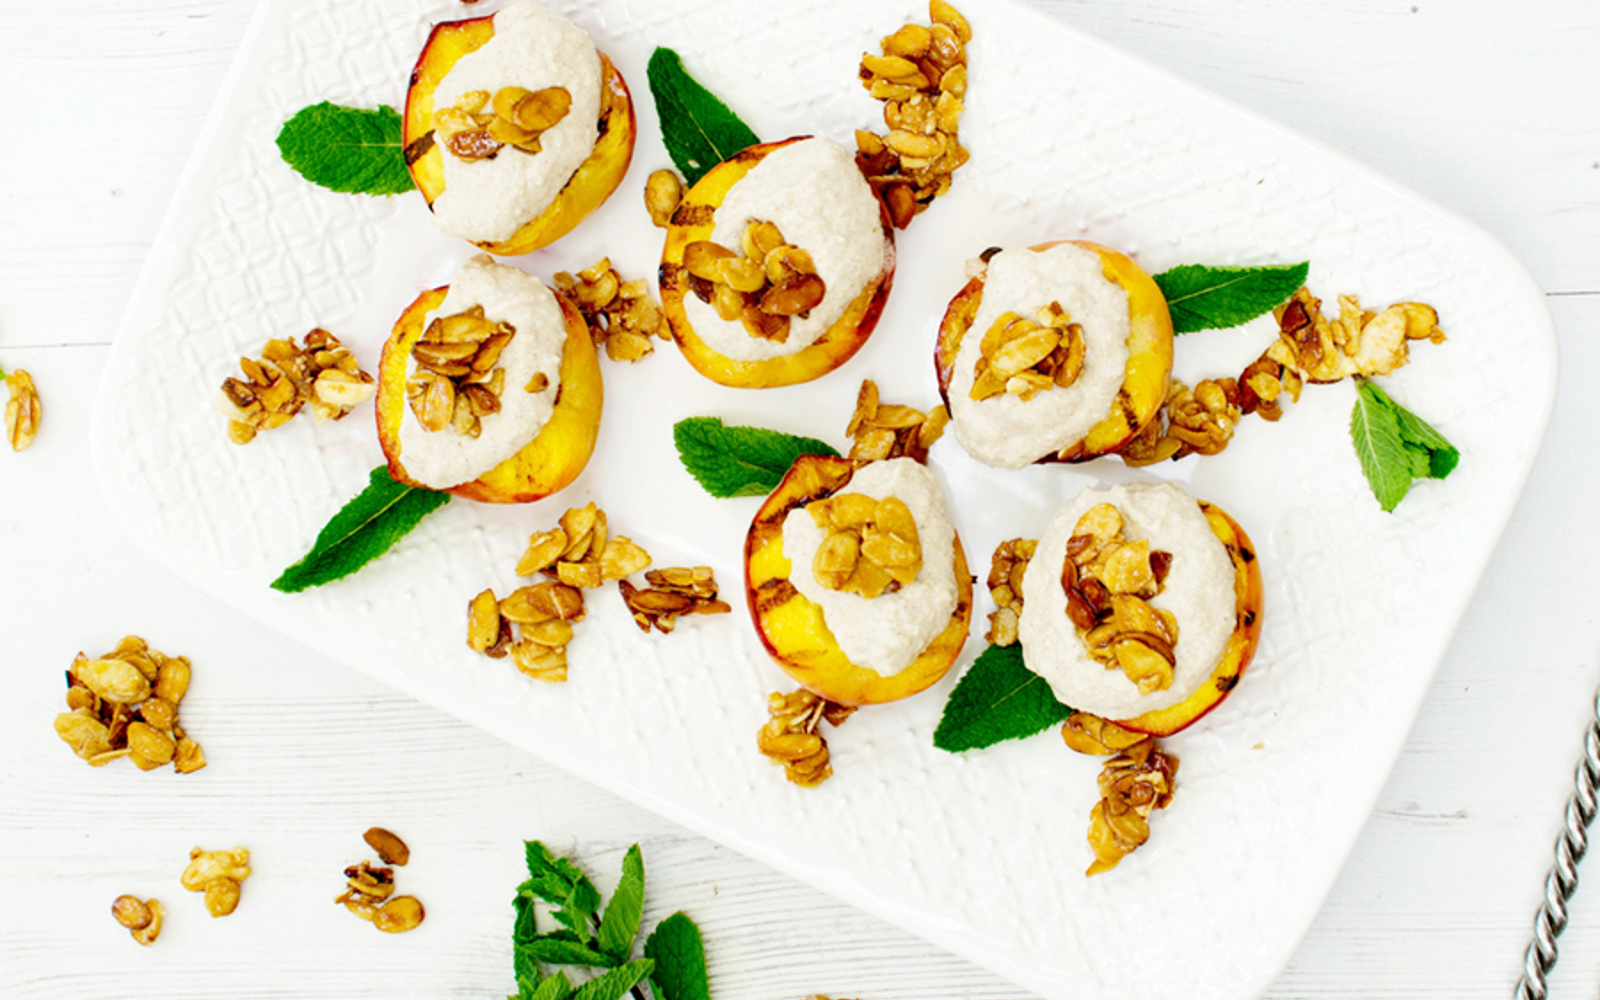 Roasted Peaches With Cashew Cinnamon Cream and Carmelized Almonds